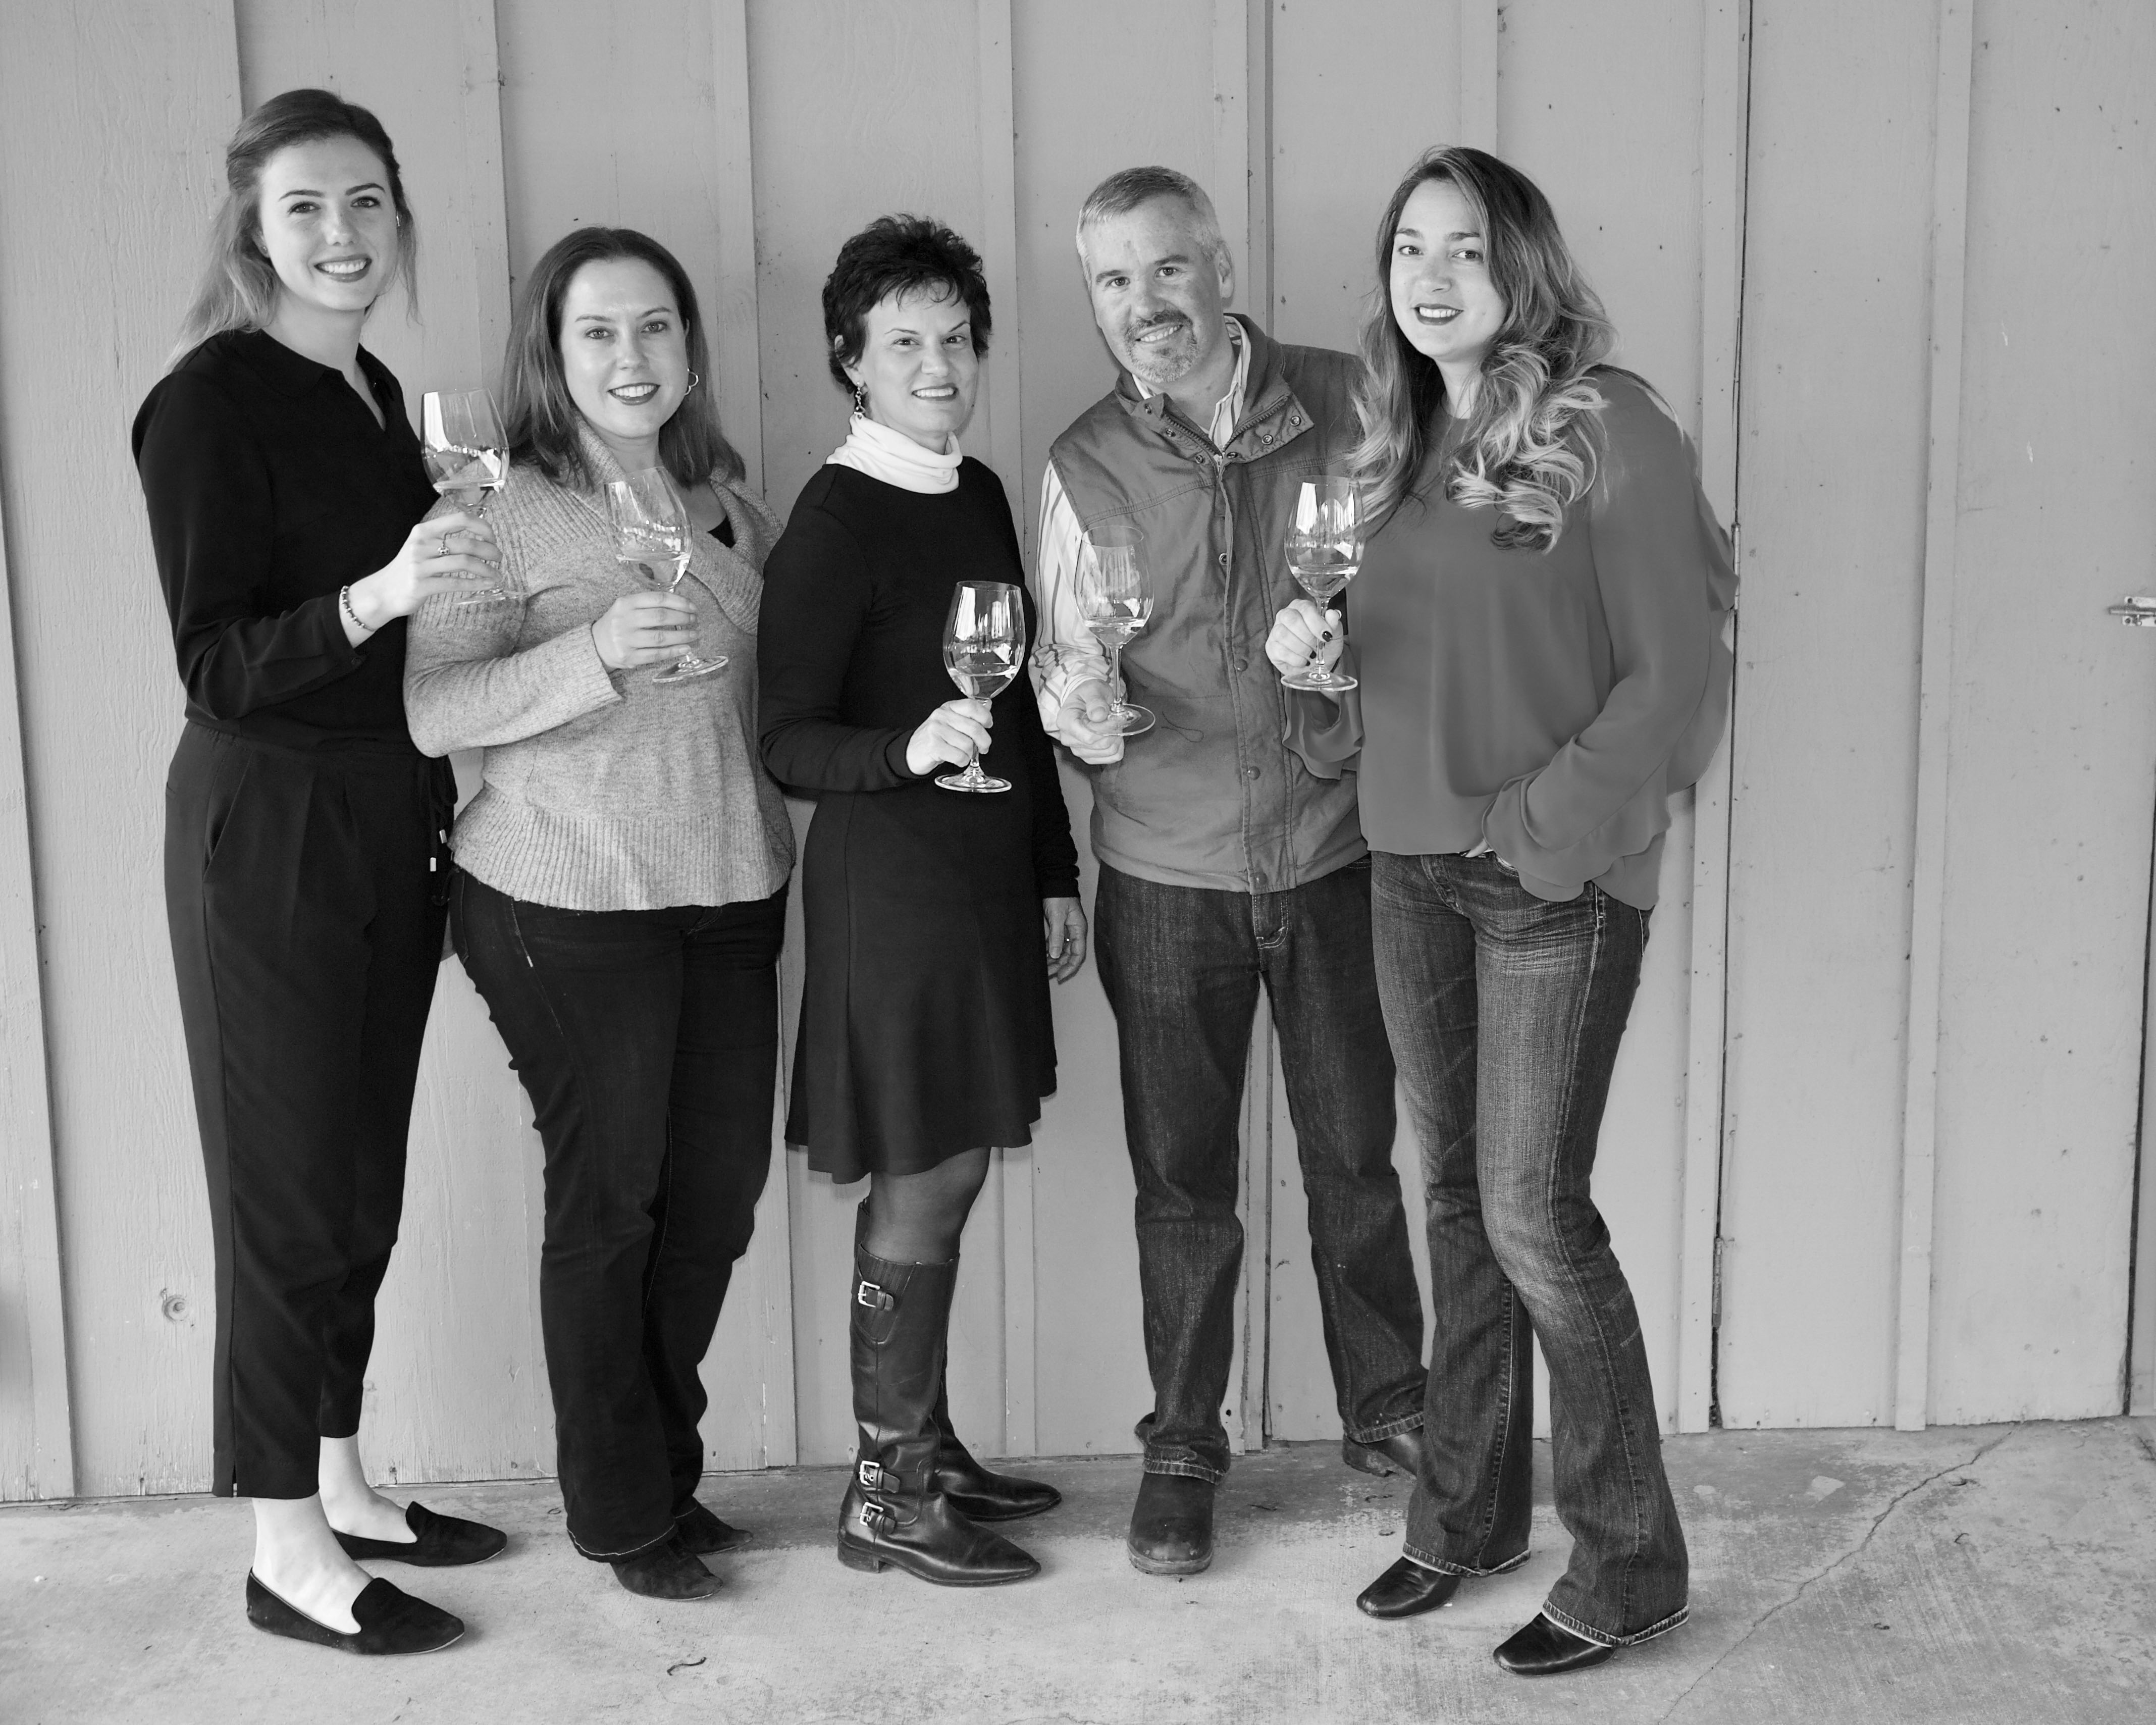 The Carneros Wine Alliance, a non-profit association of wineries and grape-growers in the Carneros American Viticultural Area (AVA), announced today that they have elected a new board of directors.